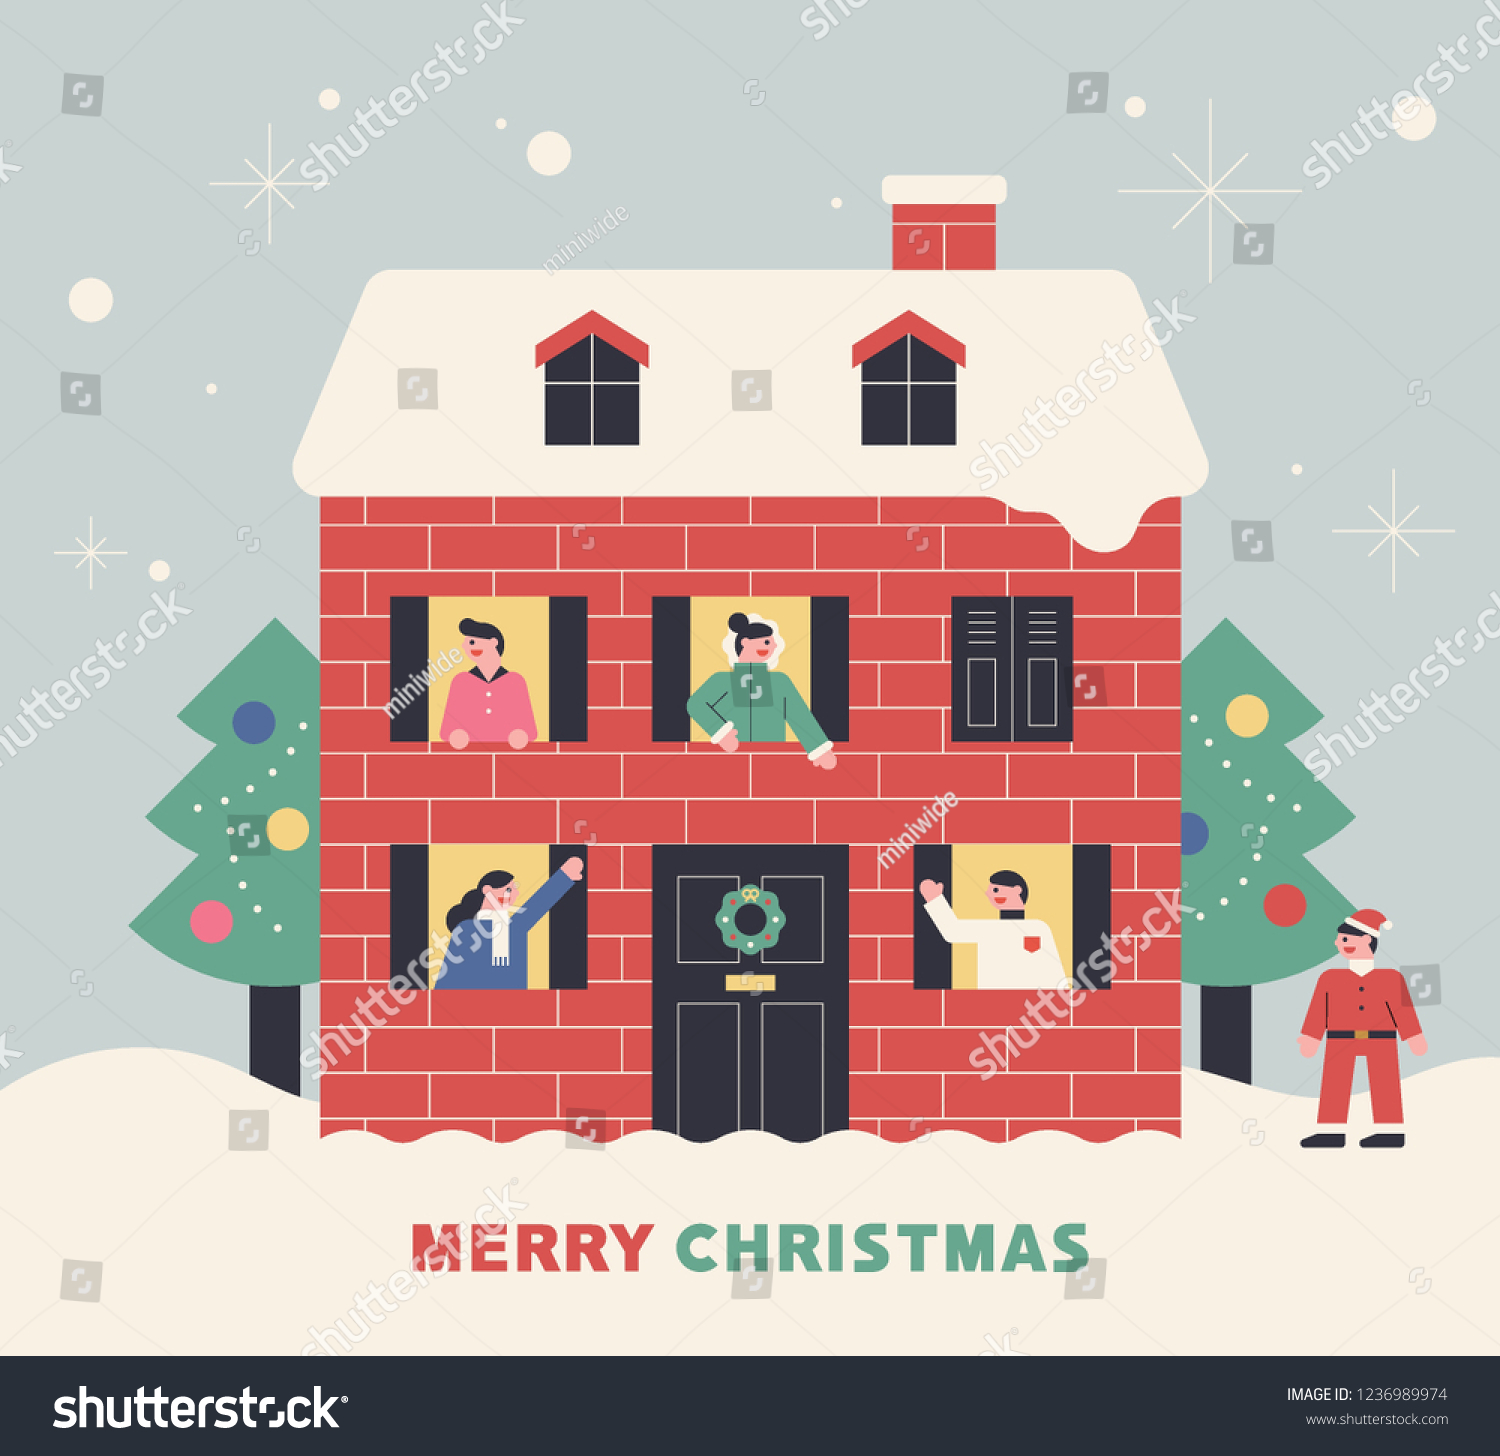 Download Christmas House Illustration Greeting Card Template Stock Vector Royalty Free 1236989974 Yellowimages Mockups